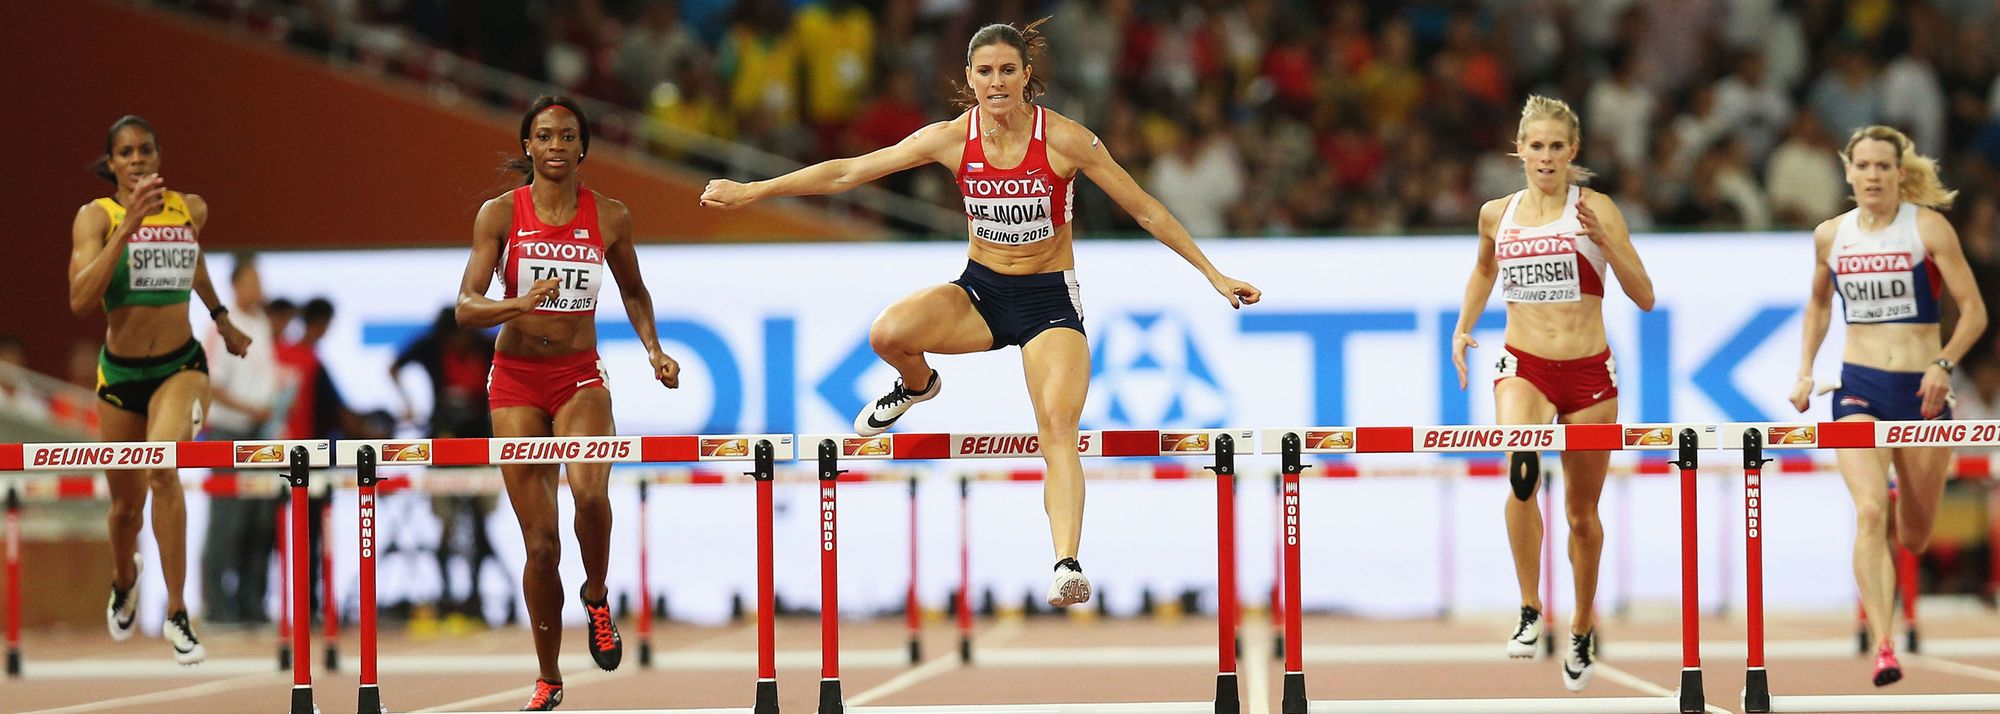 The Olympic medallist is to bid an official farewell to her successful career at the Ostrava Golden Spike.